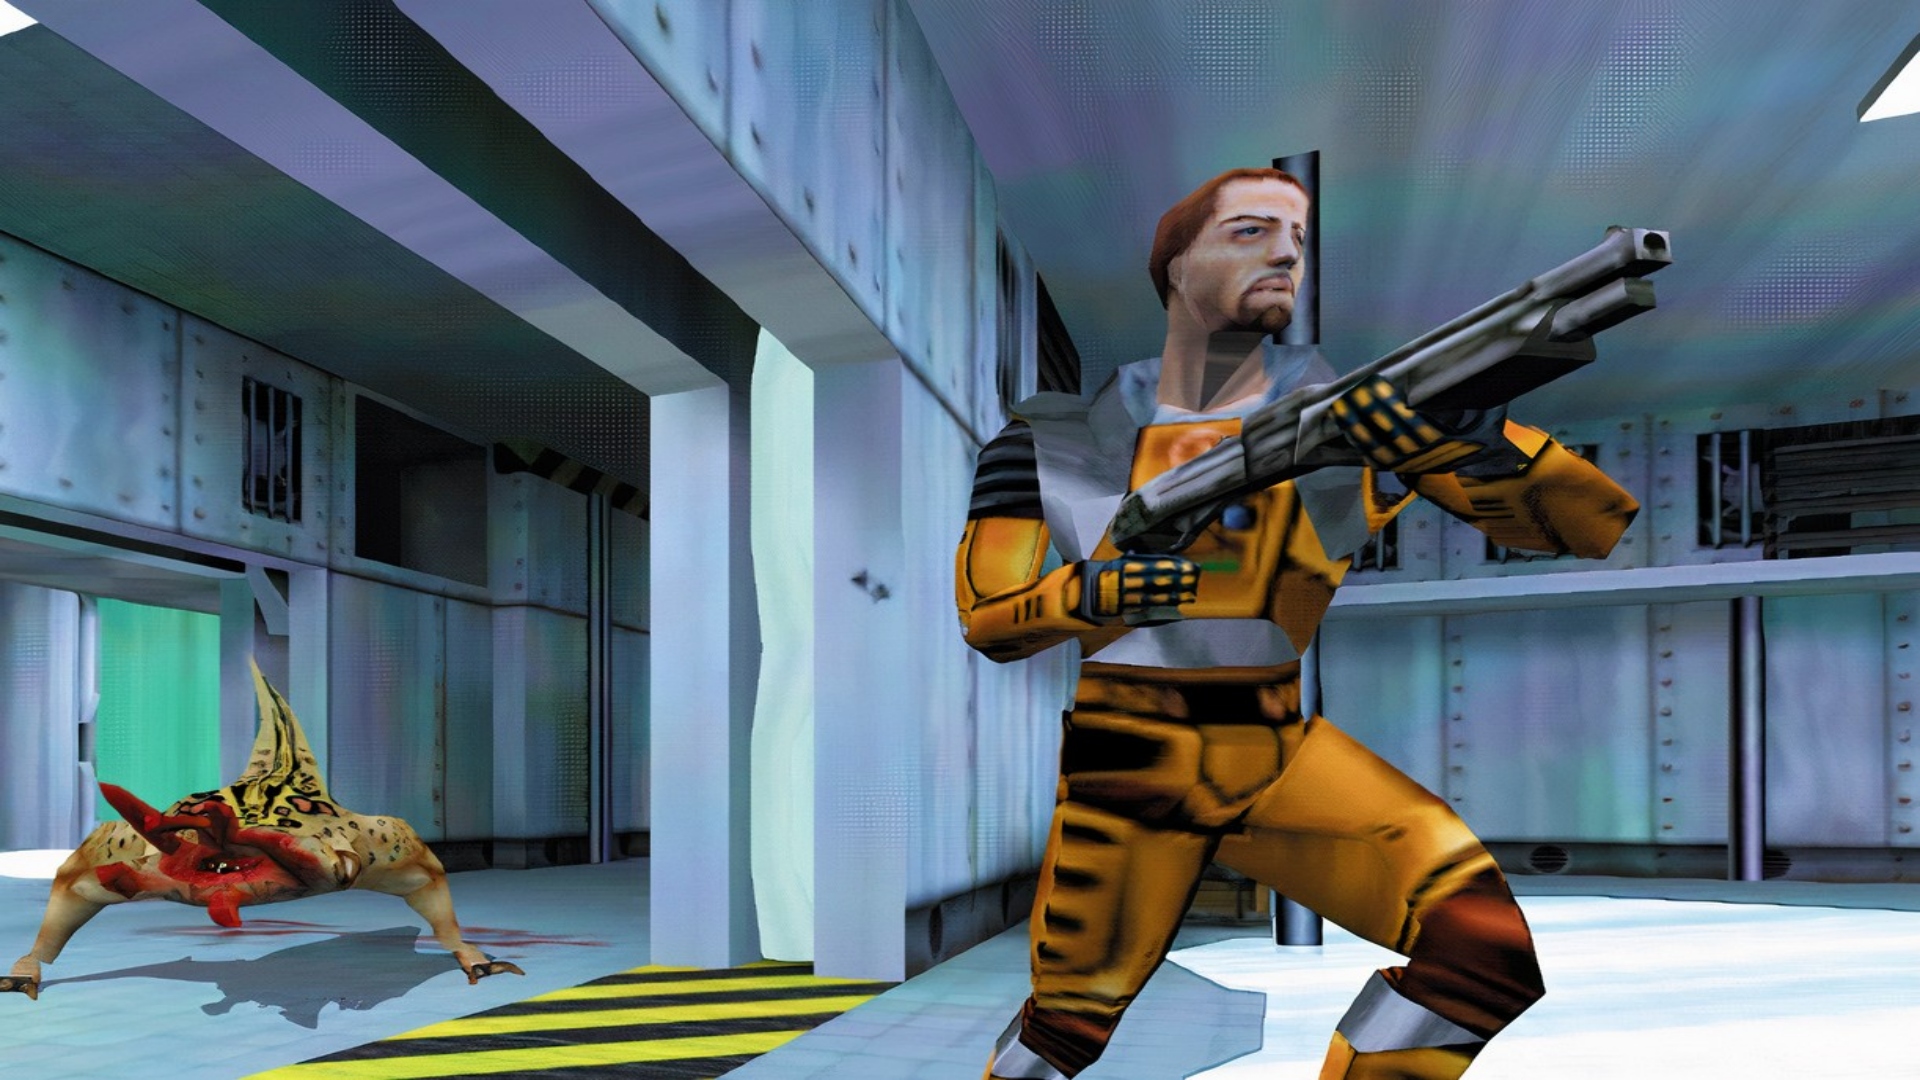 Half-Life roguelike shooter approved for Steam by Valve